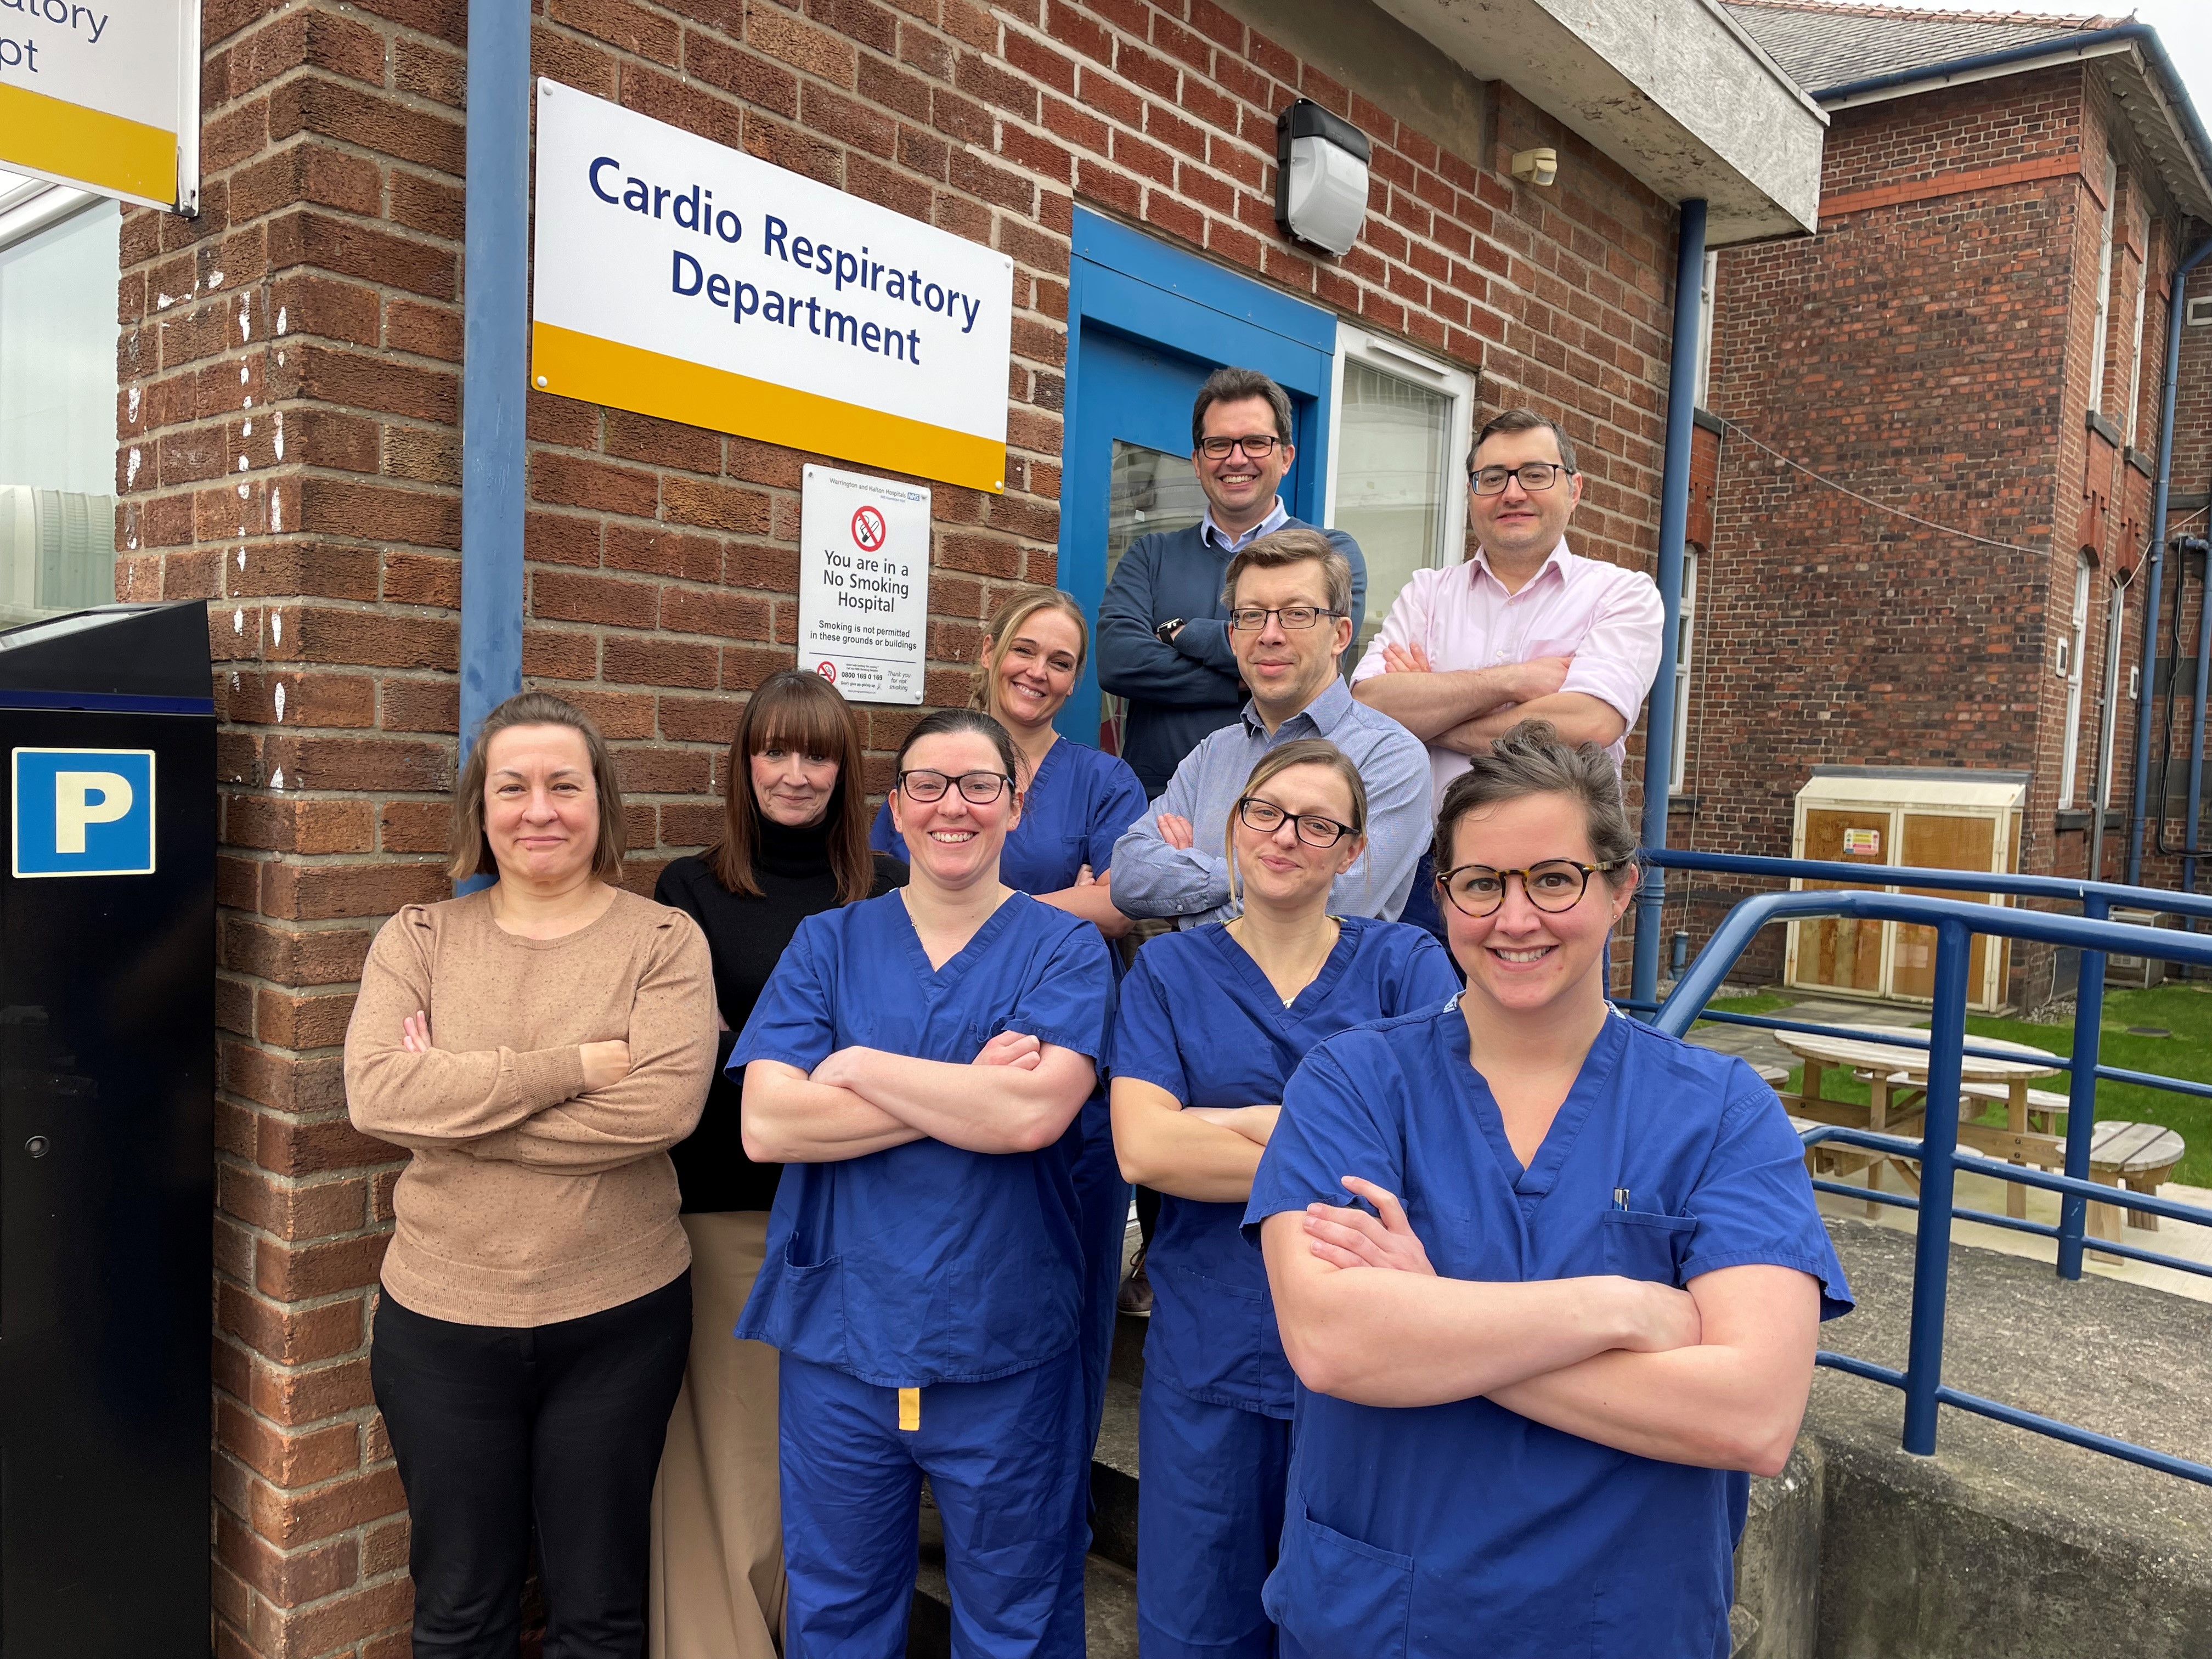 Trust's Echo Team outside the Cardio Respiratory Department based at Warrington Hospital.